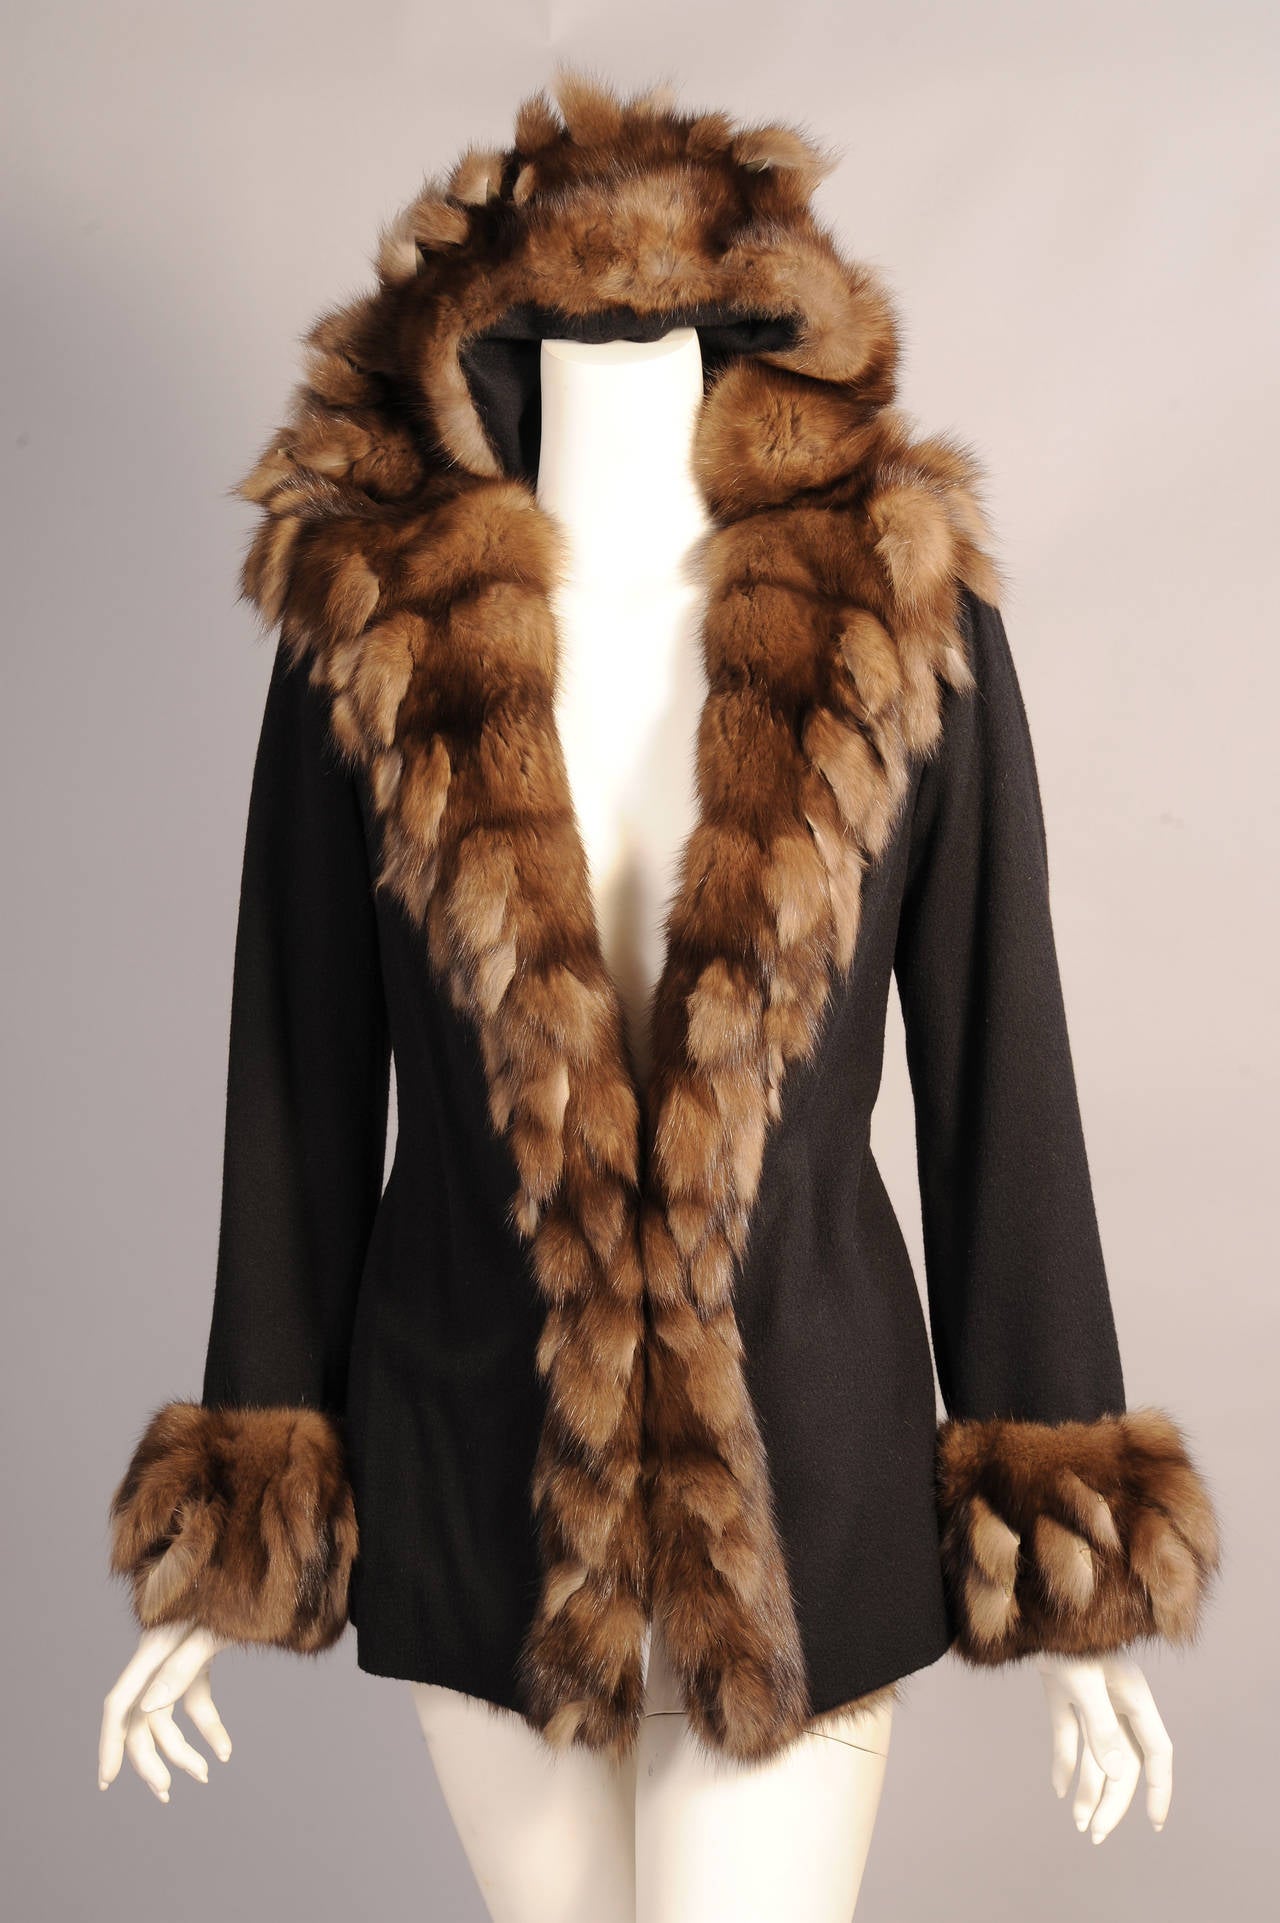 Carlo Tivioli an Italian furrier has trimmed this hooded black cashmere jacket with a wide band of luxurious sable.This is trimmed with a fringe of sable pieces for a modern look. The jacket has two pockets. apeplum in back and it is fully lined in